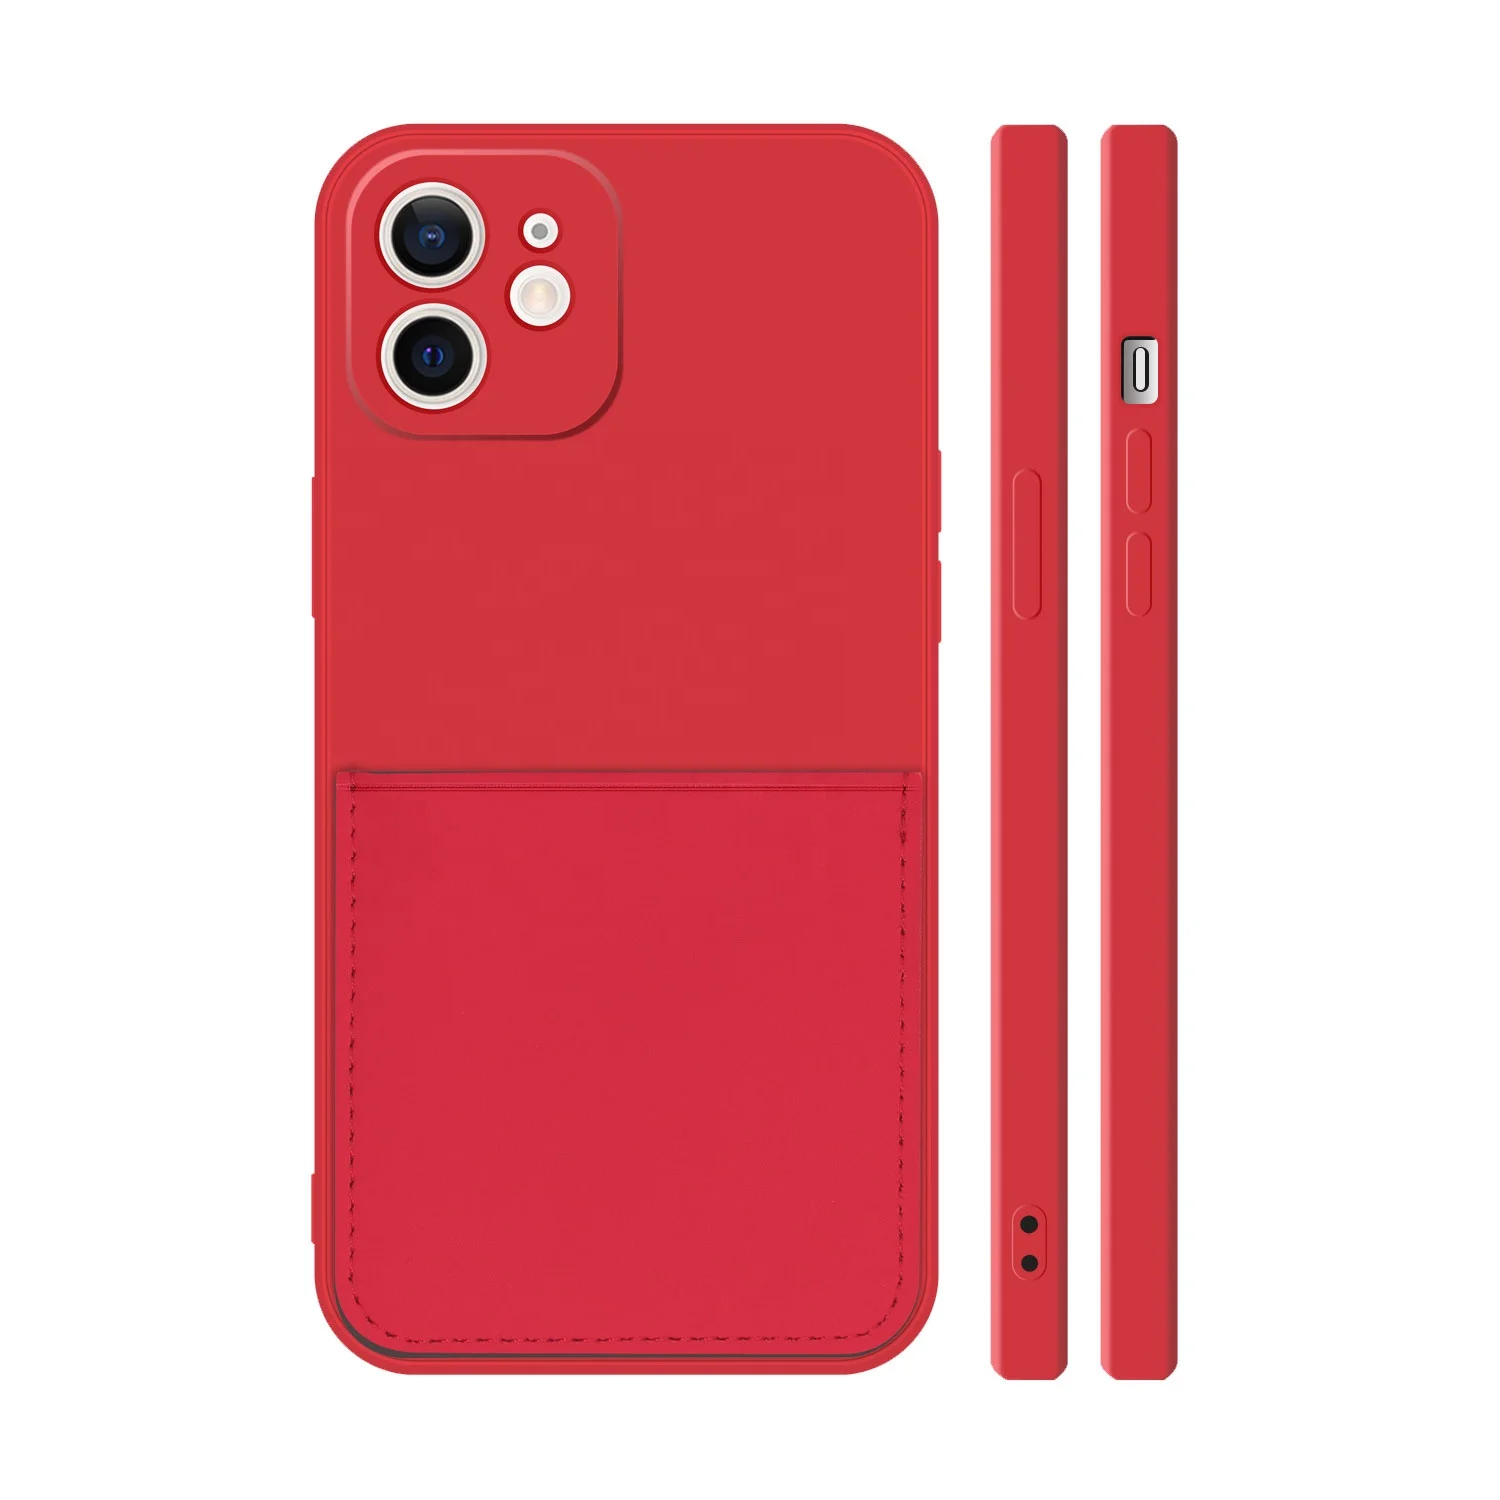 

Phone Case New 2021 Fashion card slot Wholesale Amazon Top Seller New Product Silicon phone bags Hot cheap For Iphone 12 Case, Multi option